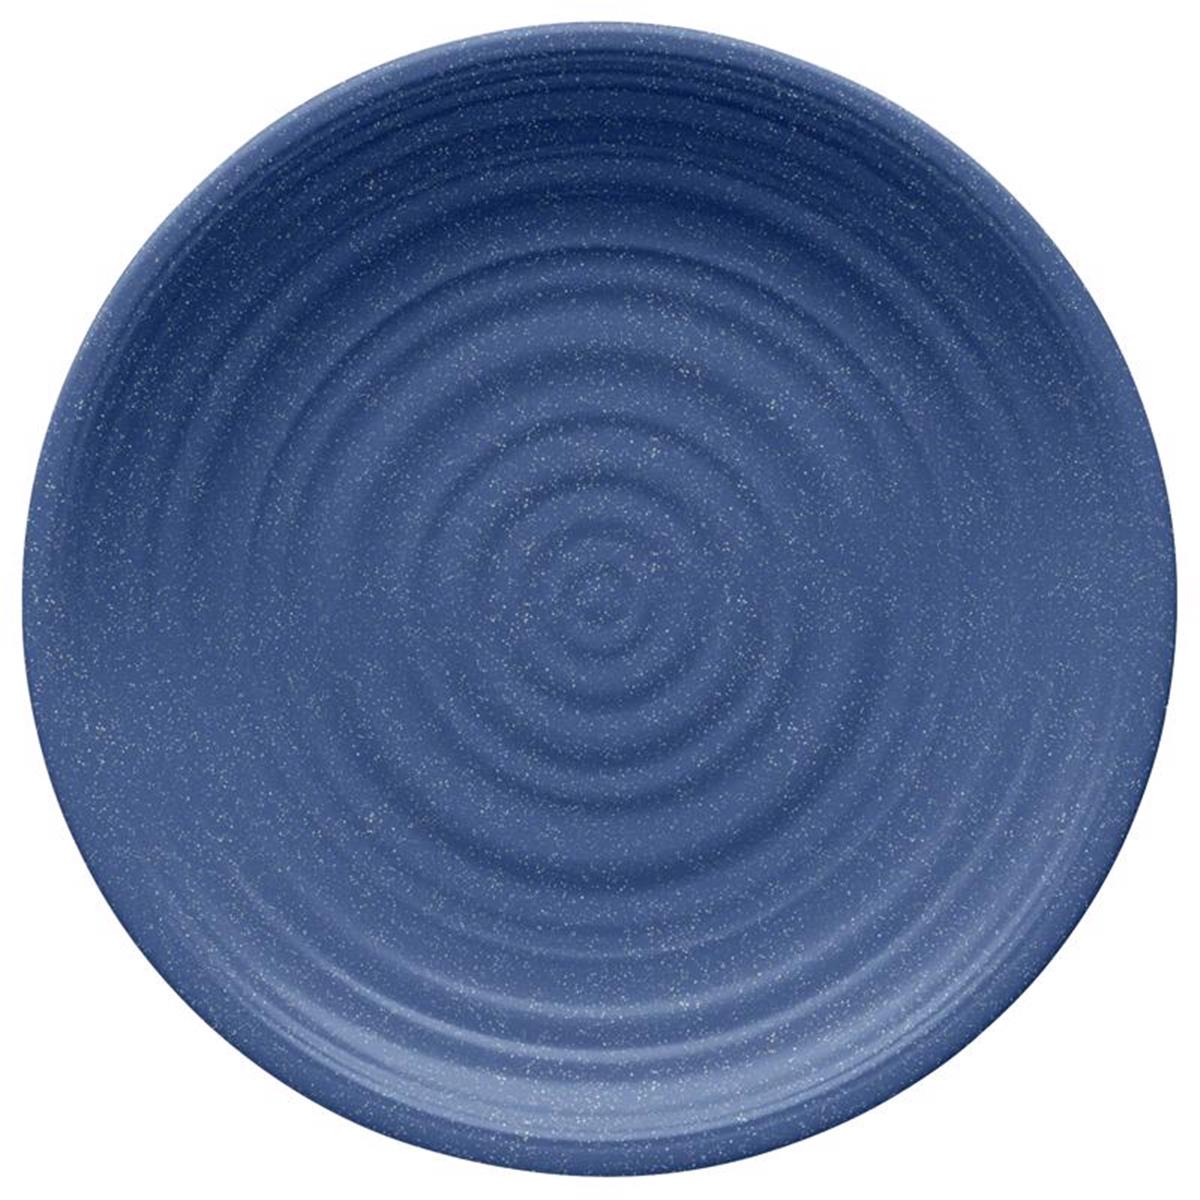 Picture of Tarhong 6032016 10.5 in. Dia. Bamboo Planta Artisan Dinner Plate, Blue - Pack of 6